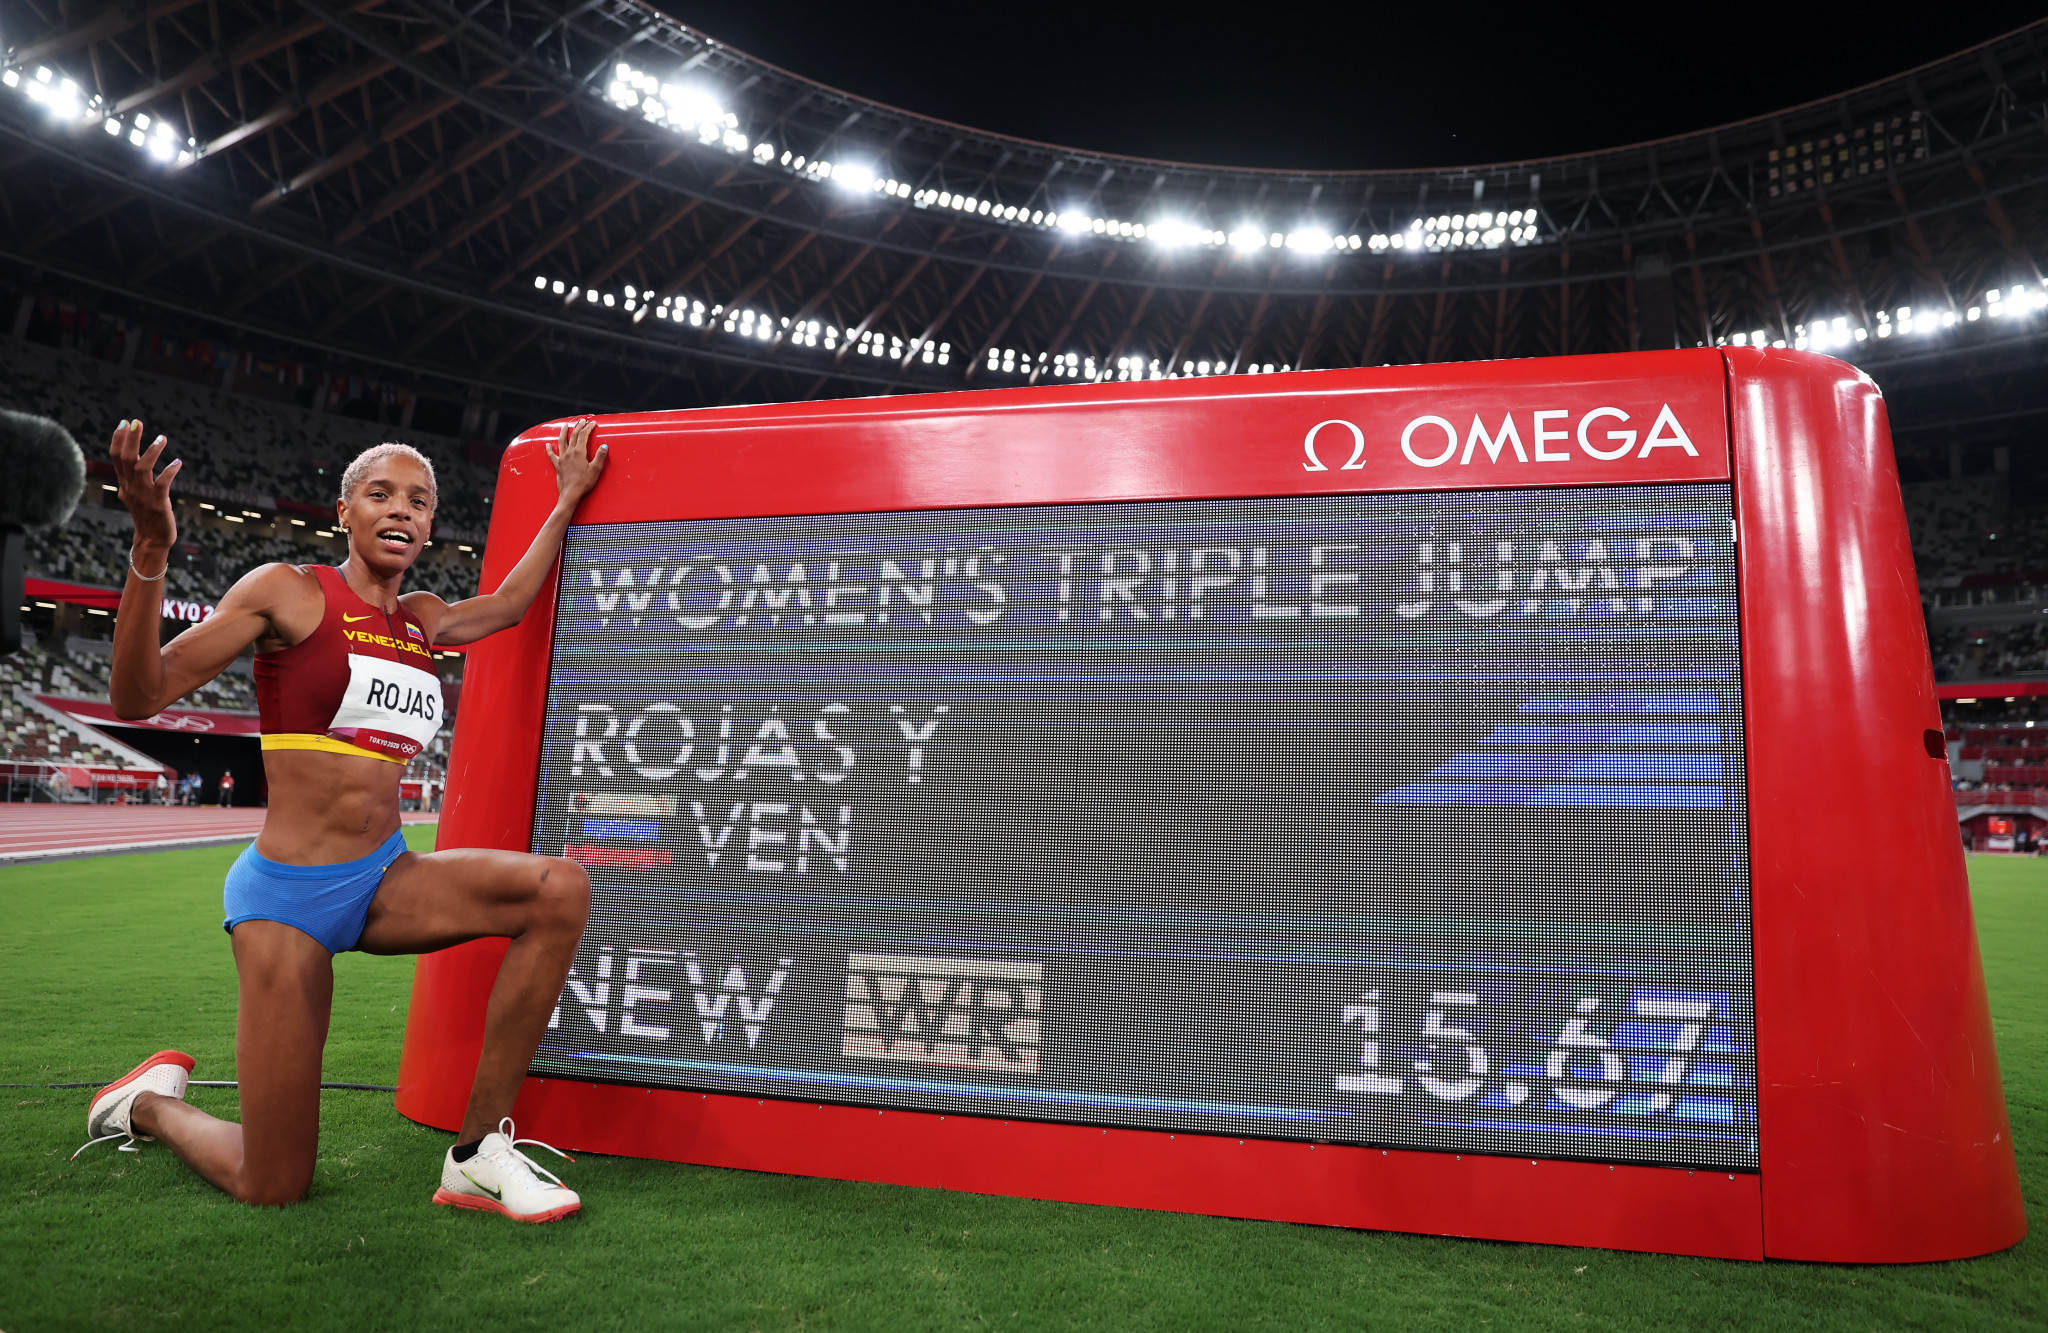 Venezuela's Yulimar Rojas eclipsed a 26-year triple jump world record at Tokyo 2020 ©Getty Images